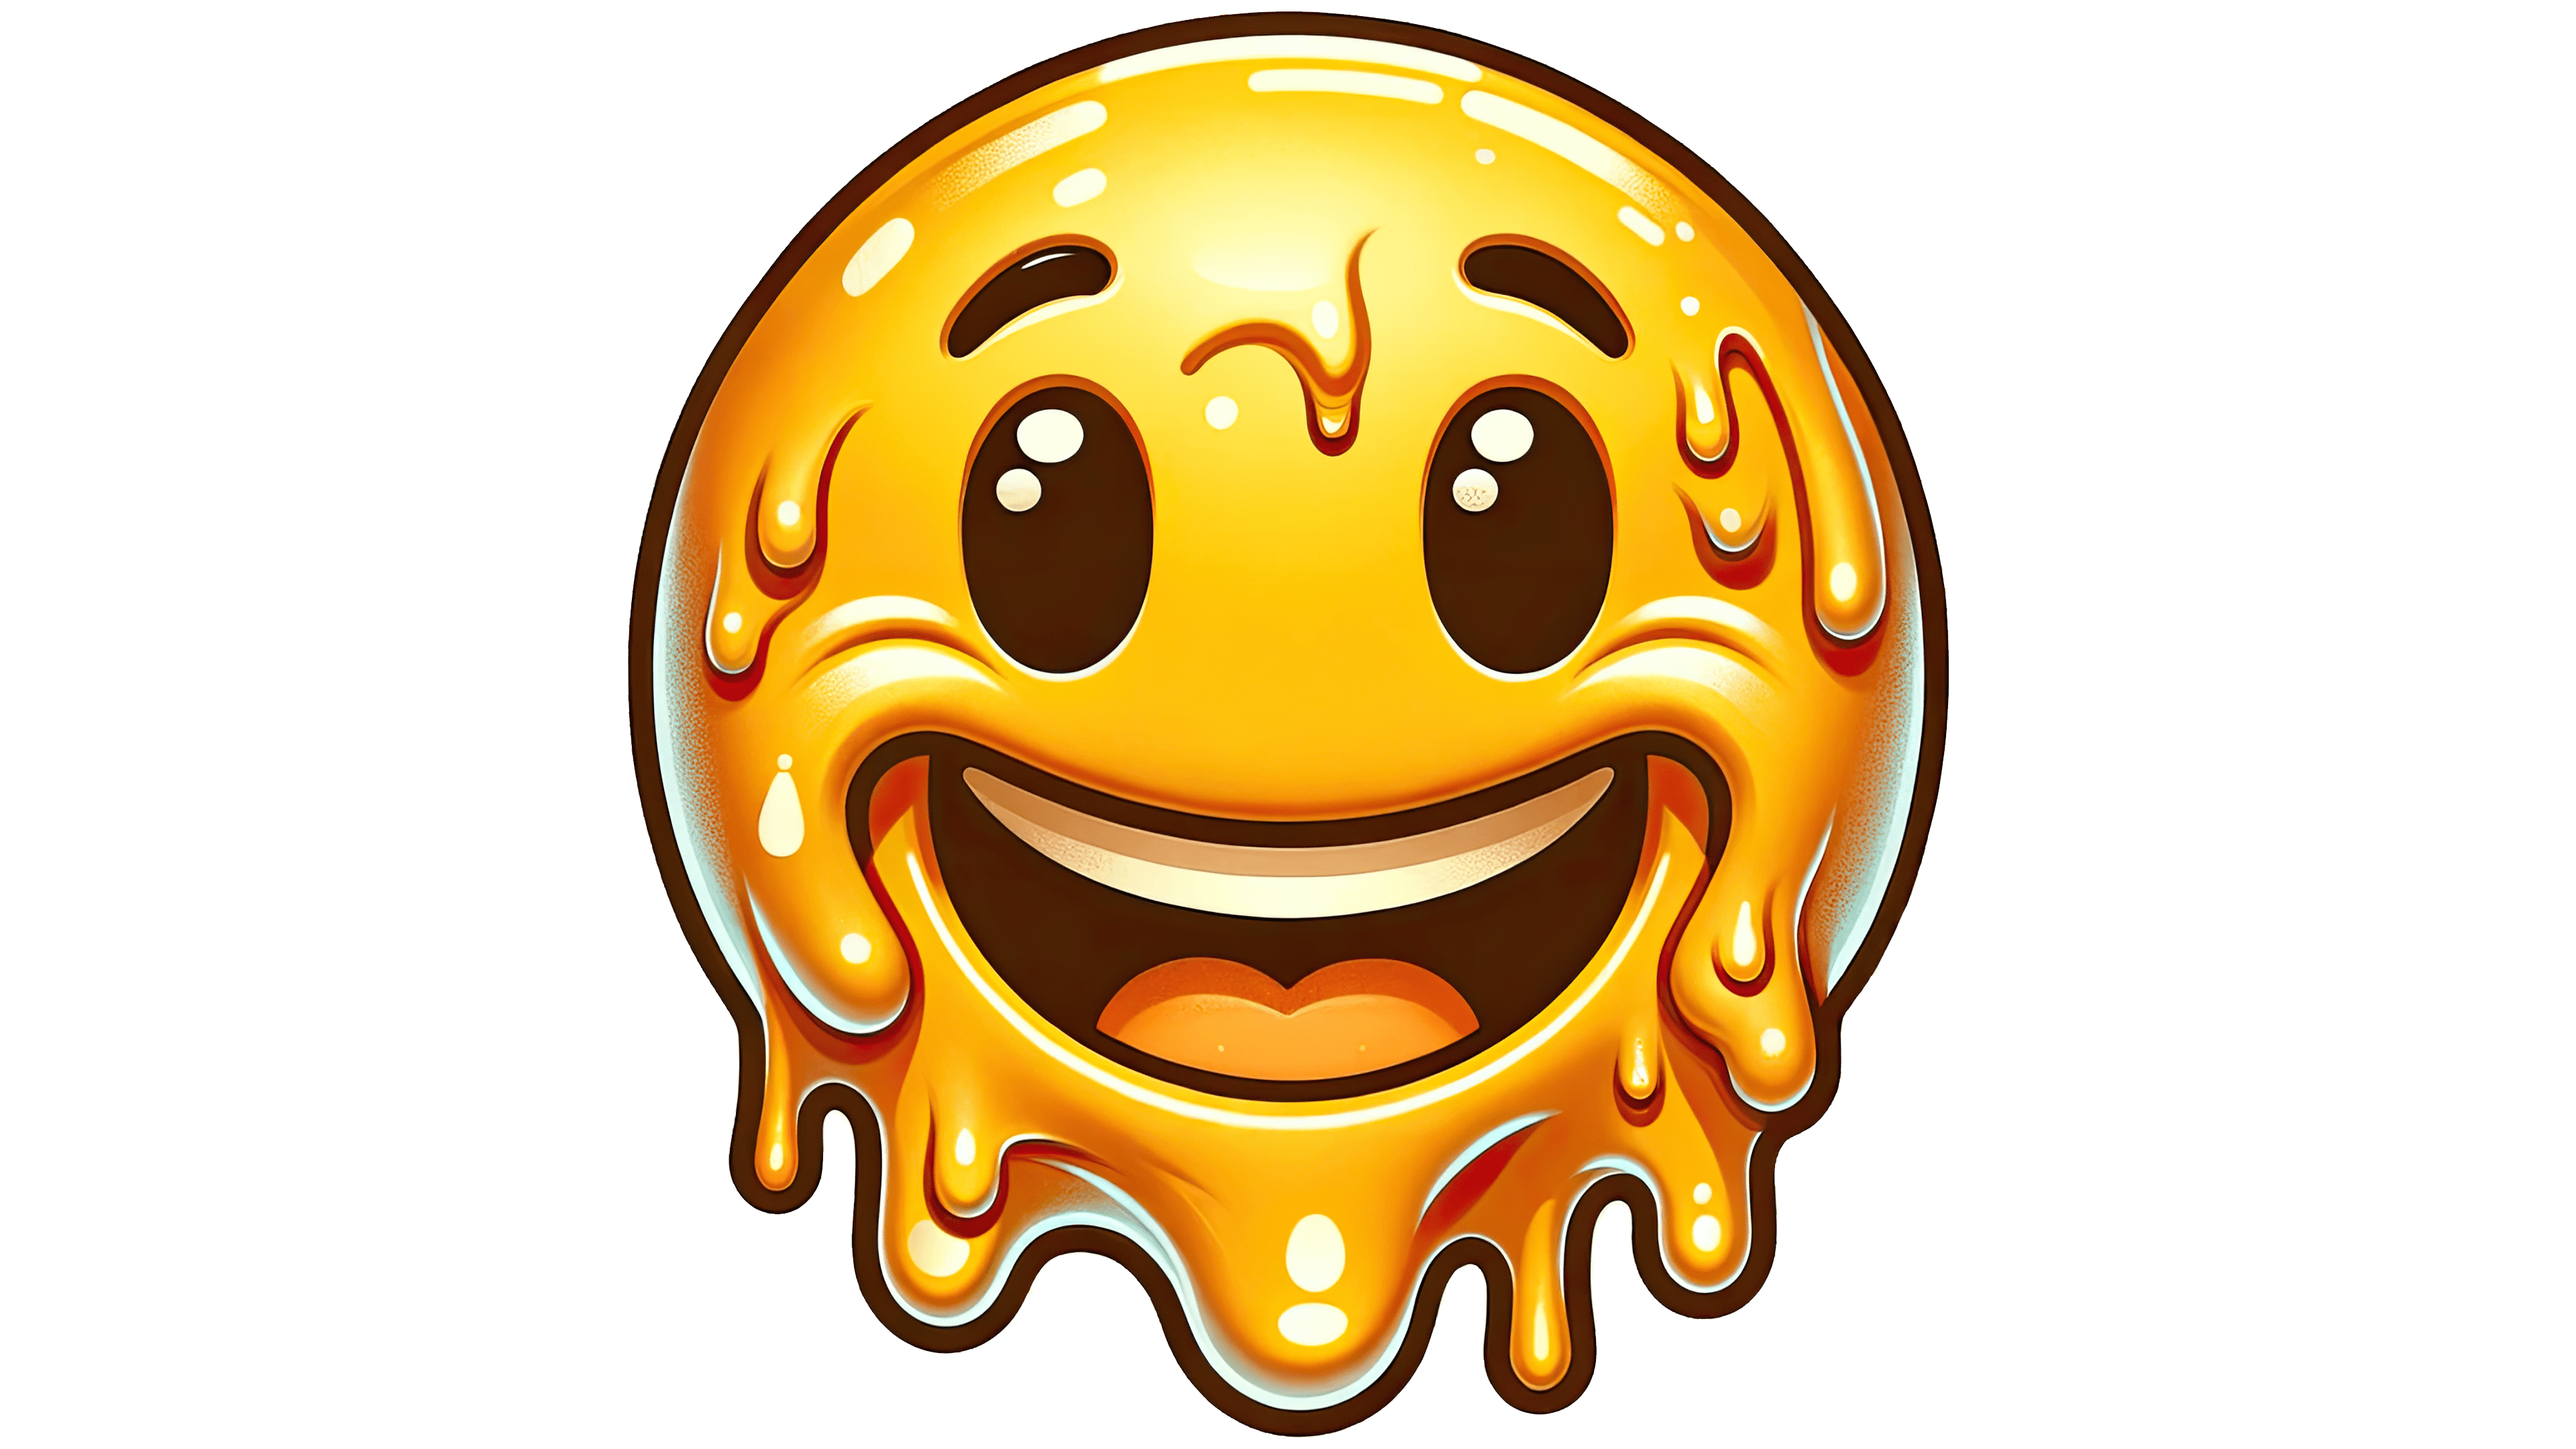 Melting Face Emoji - what it means and how to use it